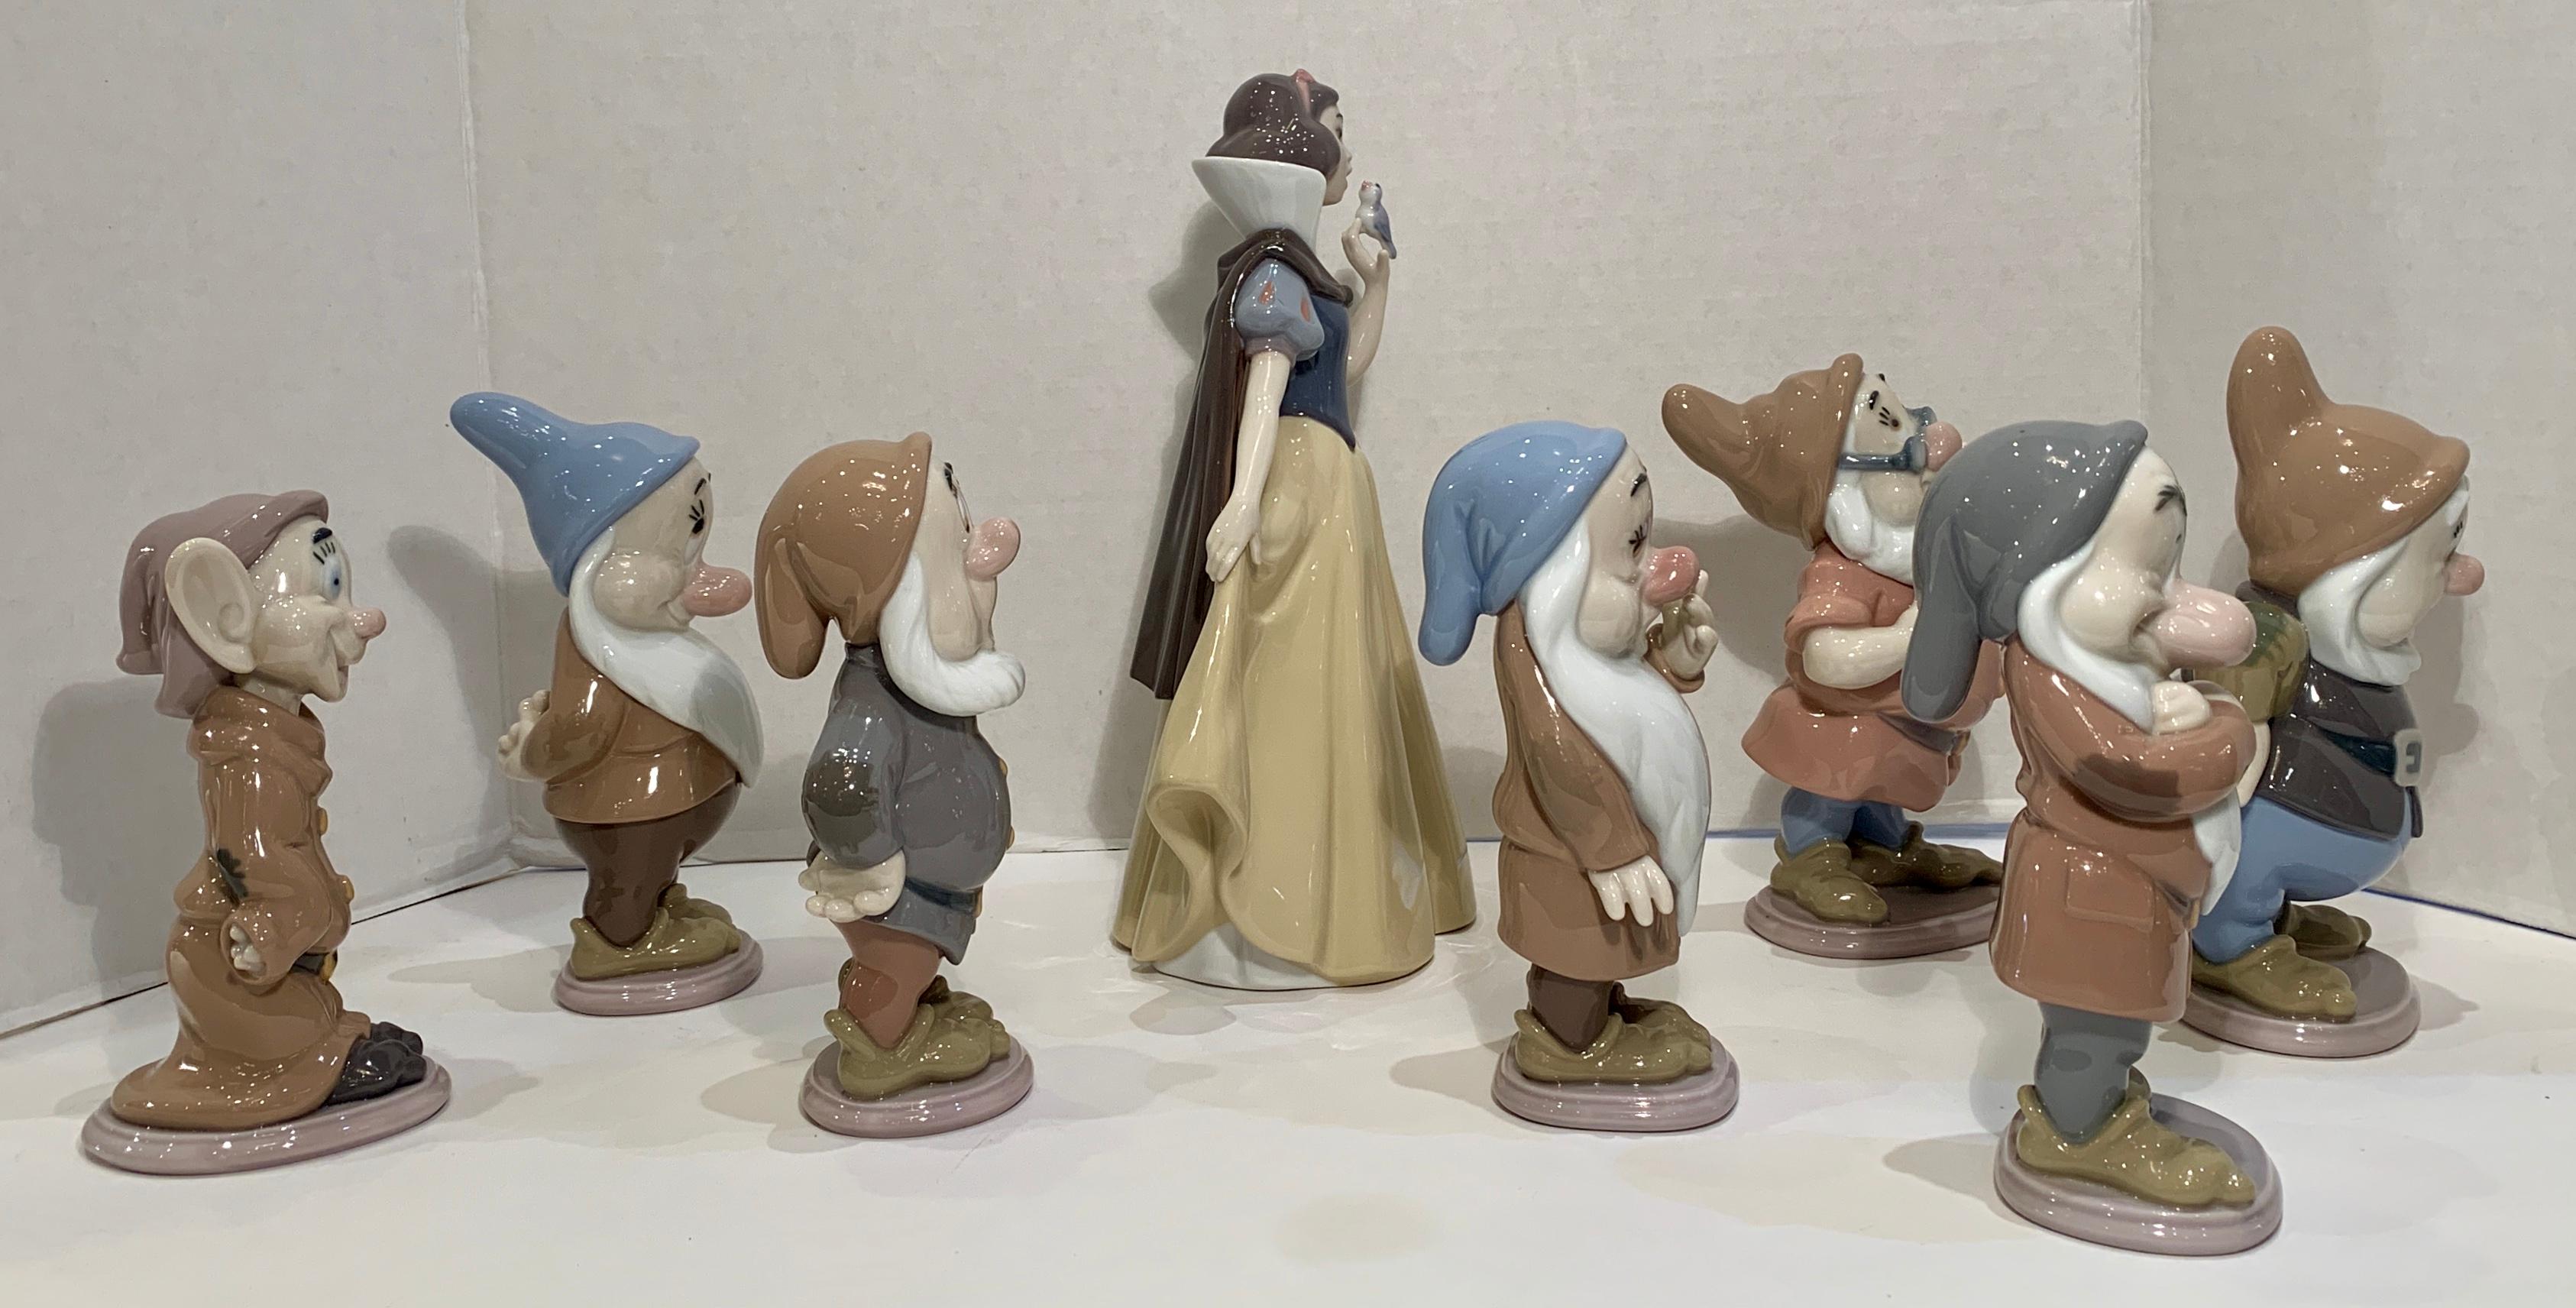 snow white and the seven dwarfs porcelain figurines